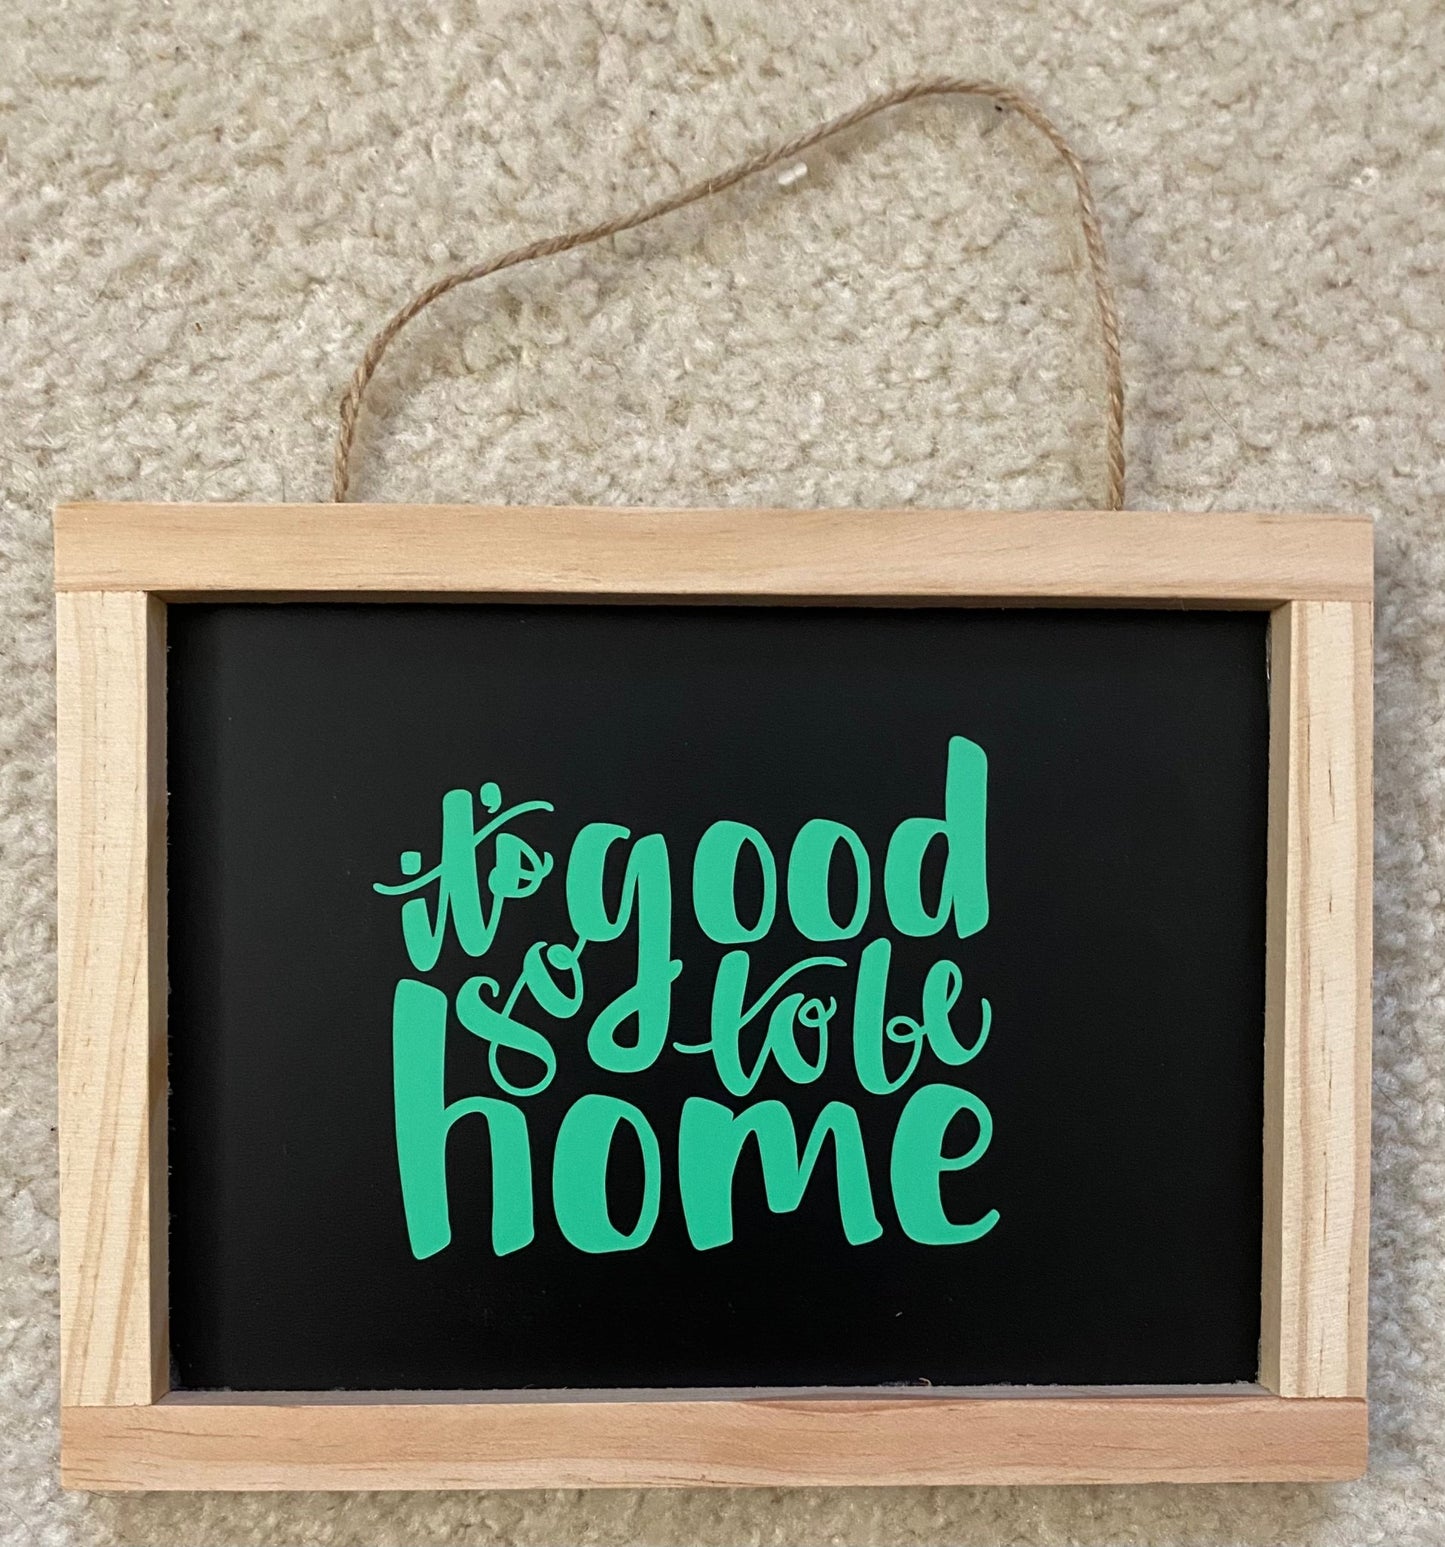 It’s So Good To Be Home sign - Blue Cava